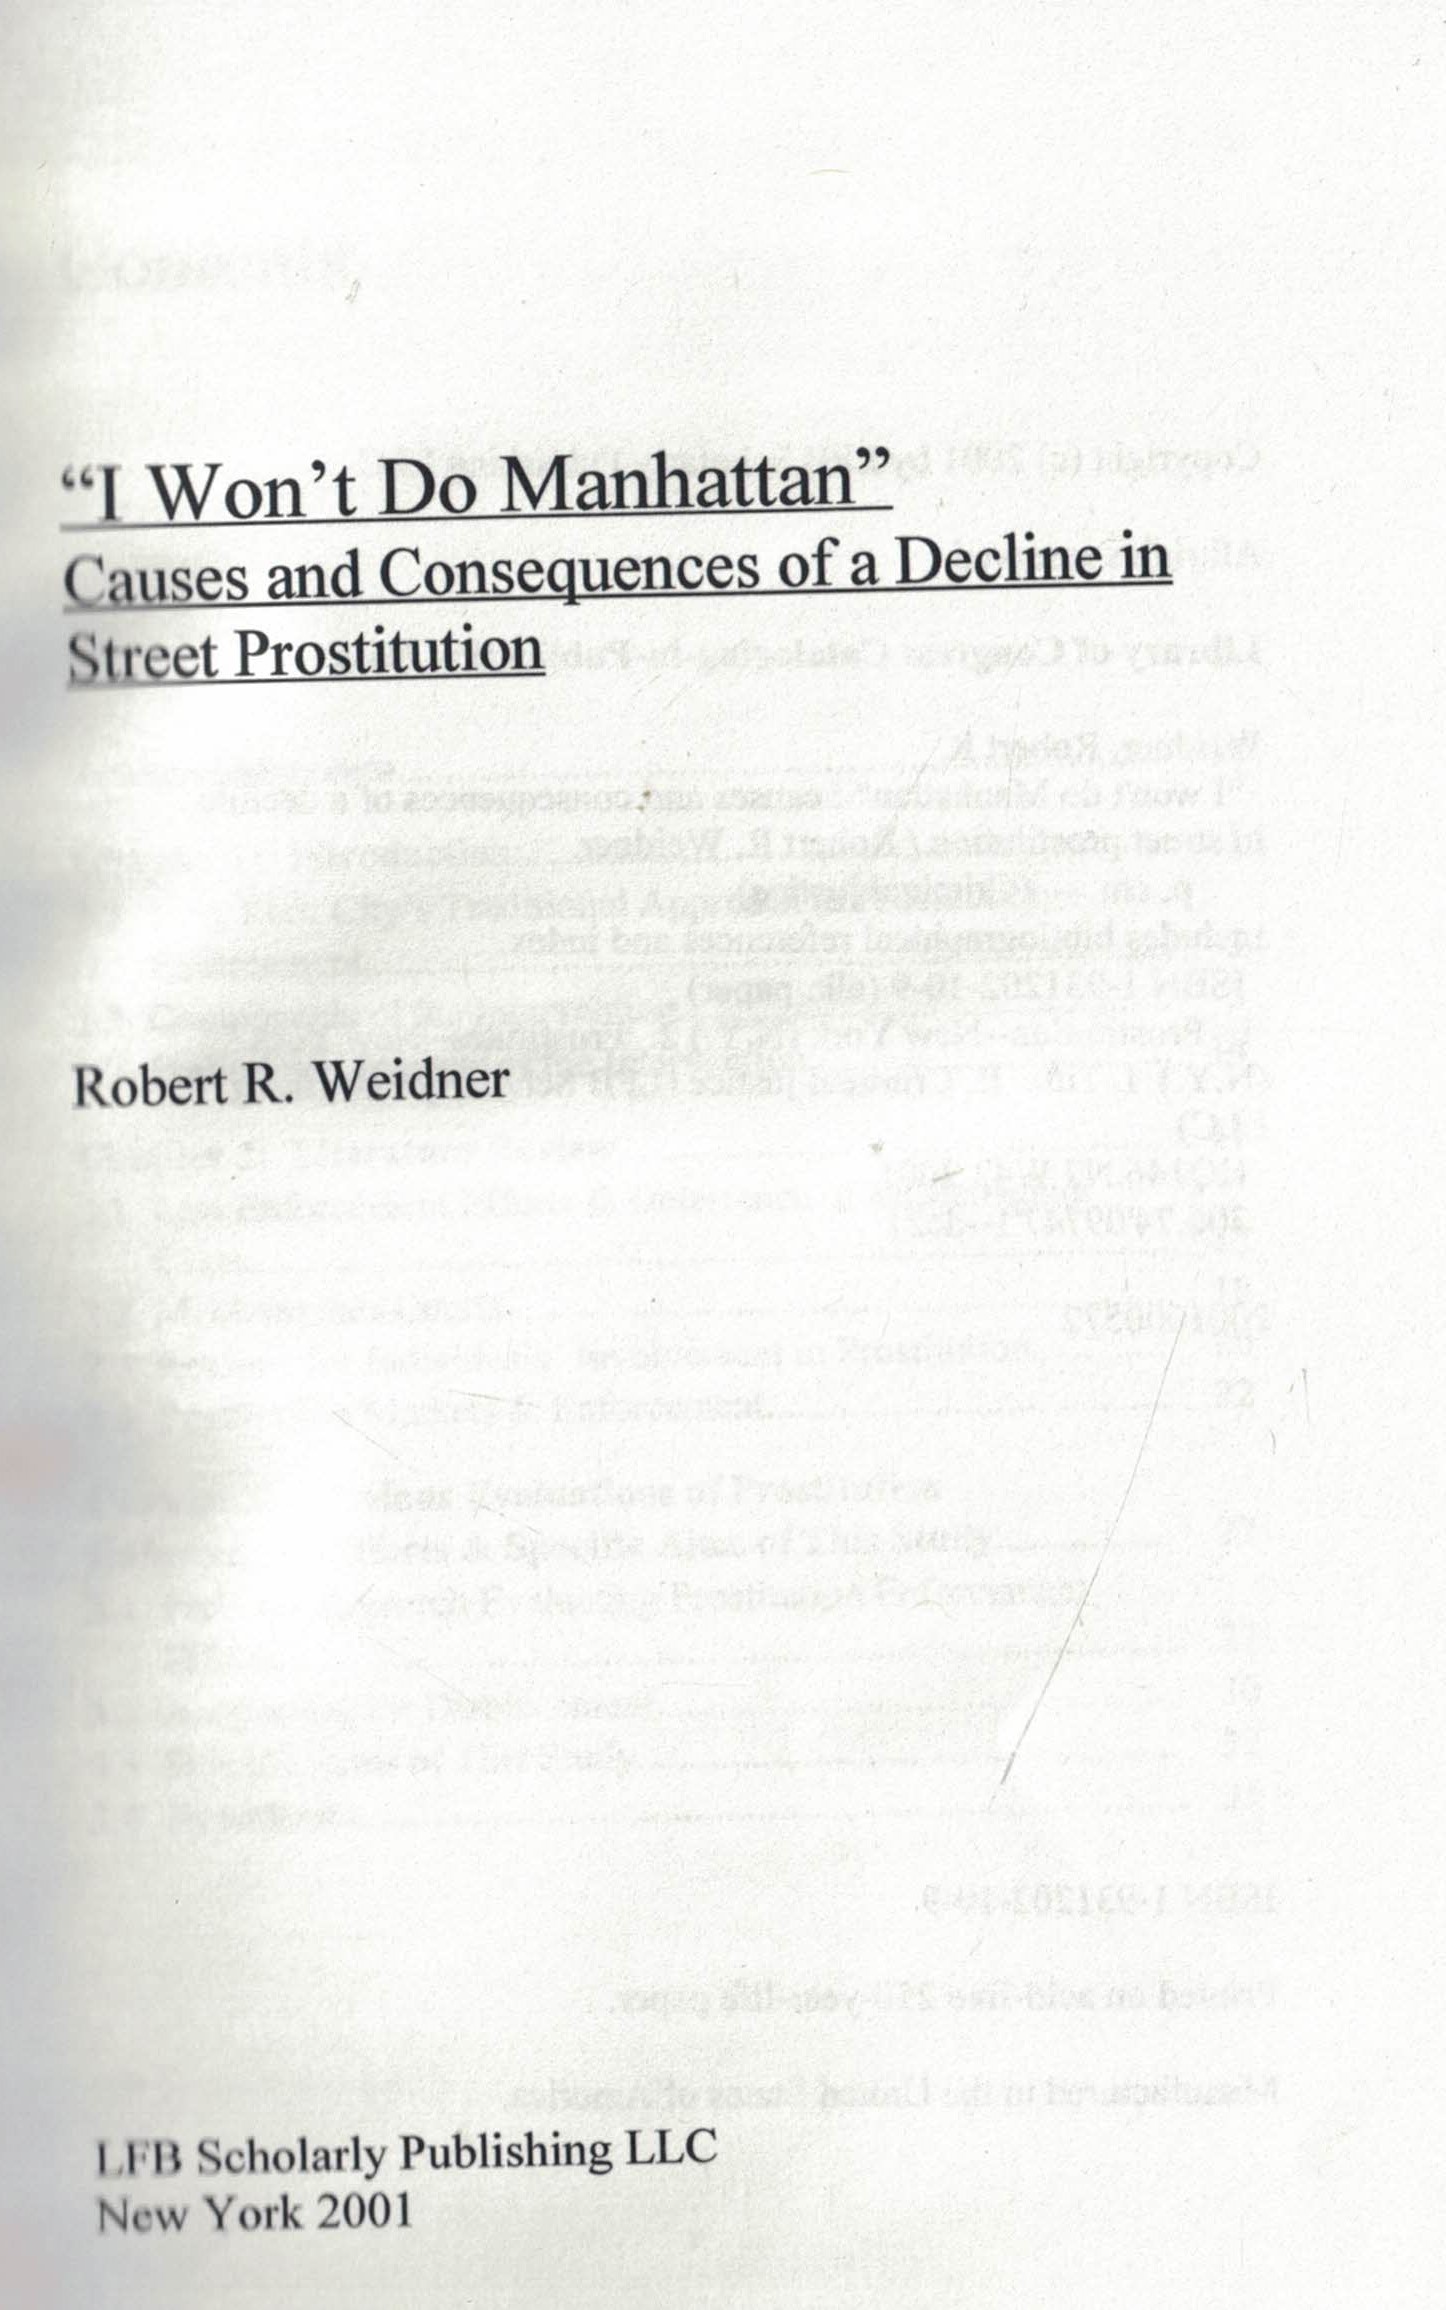 "I Won't Do Manhattan". Causes and Consequence of a Decline in Street Prostitution.